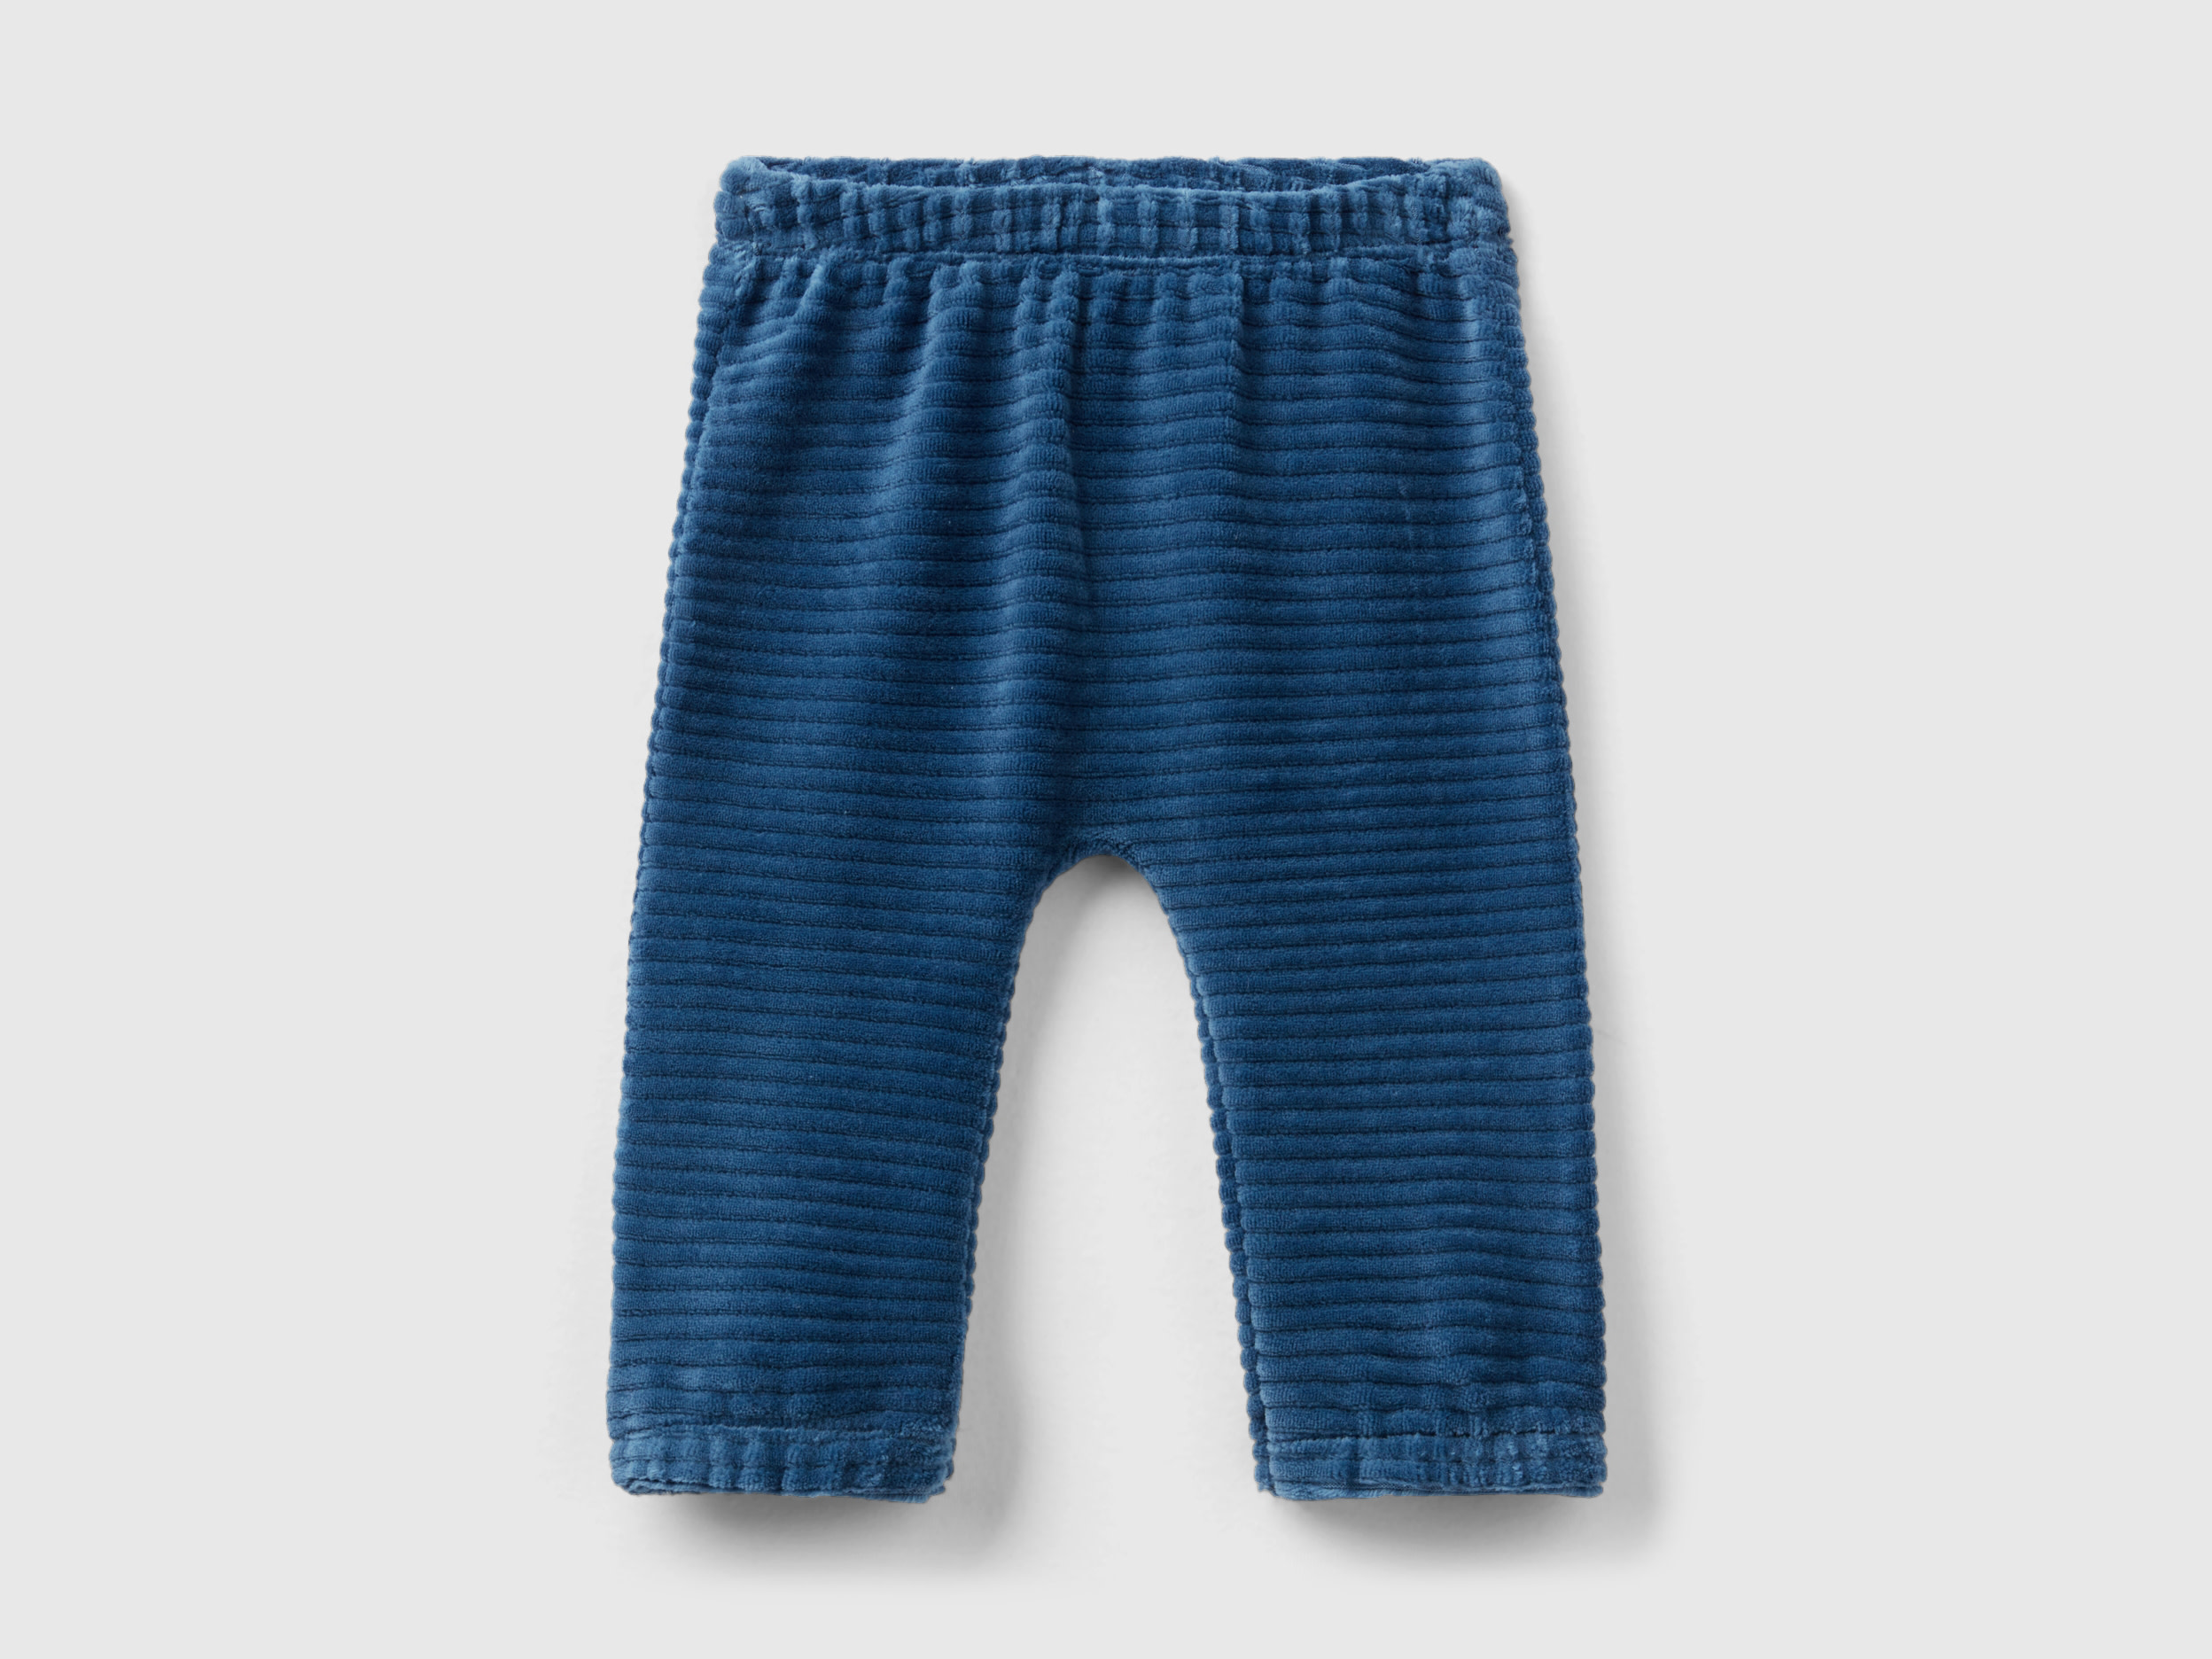 Benetton, Chenille Trousers With Embroidery, size 0-1, Blue, Kids